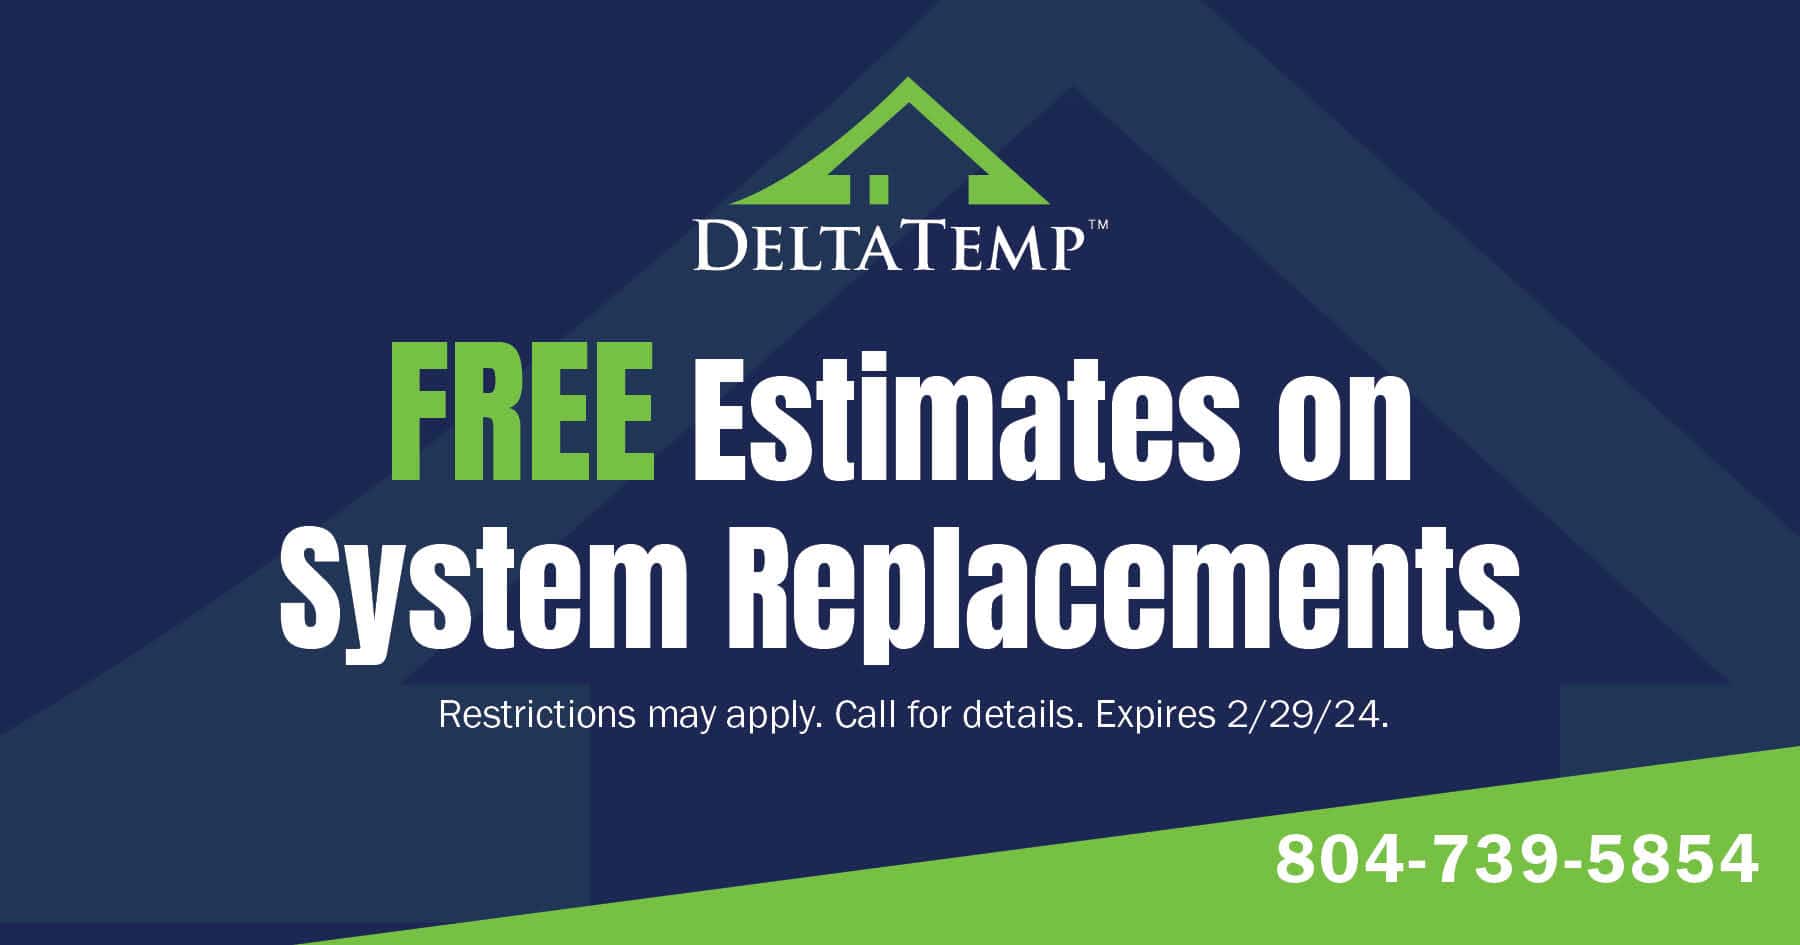 Free estimates on system replacements. Restrictions may apply. Call for details. Expires 2/29/2024.